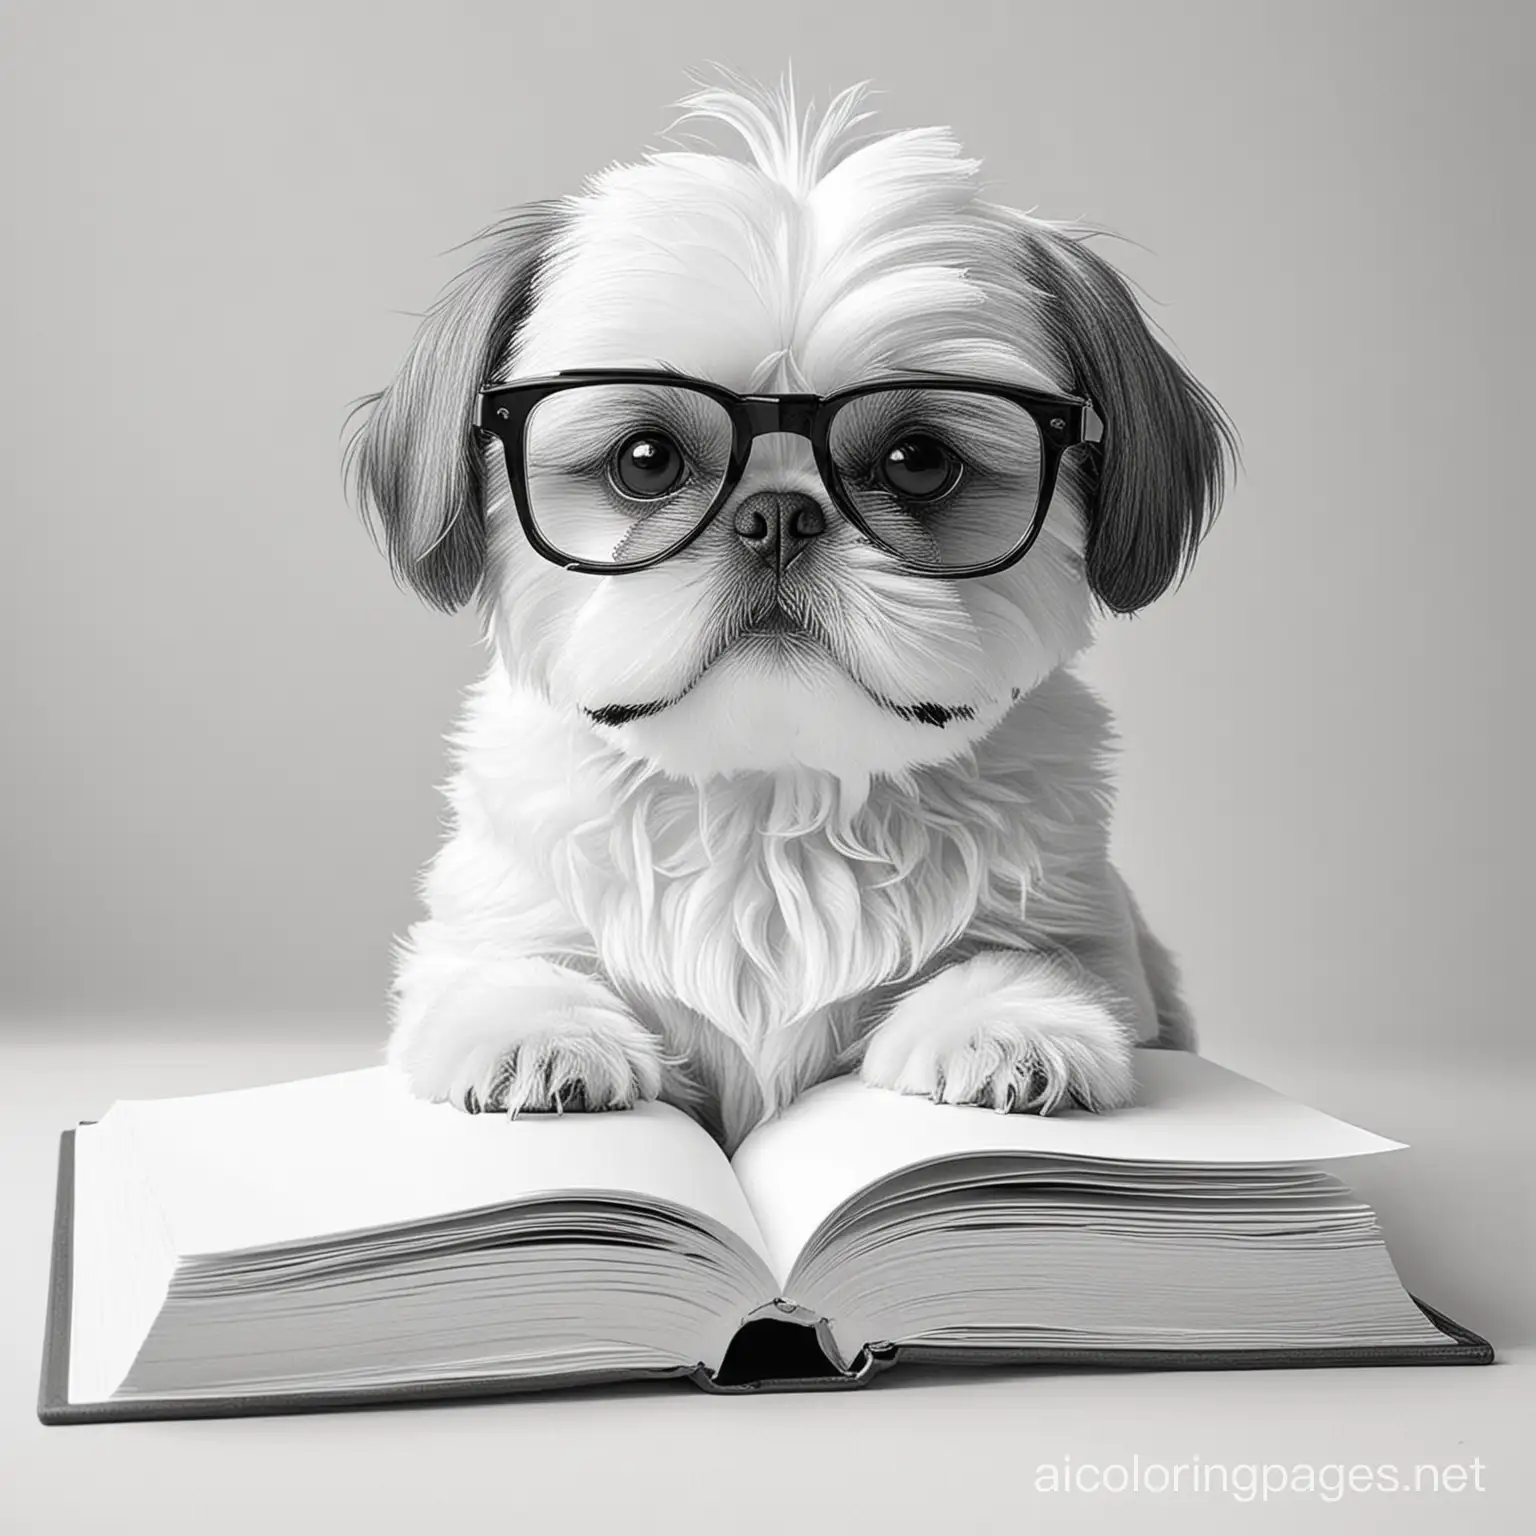 Intelligent-Shih-Tzu-Reading-Glasses-Coloring-Page